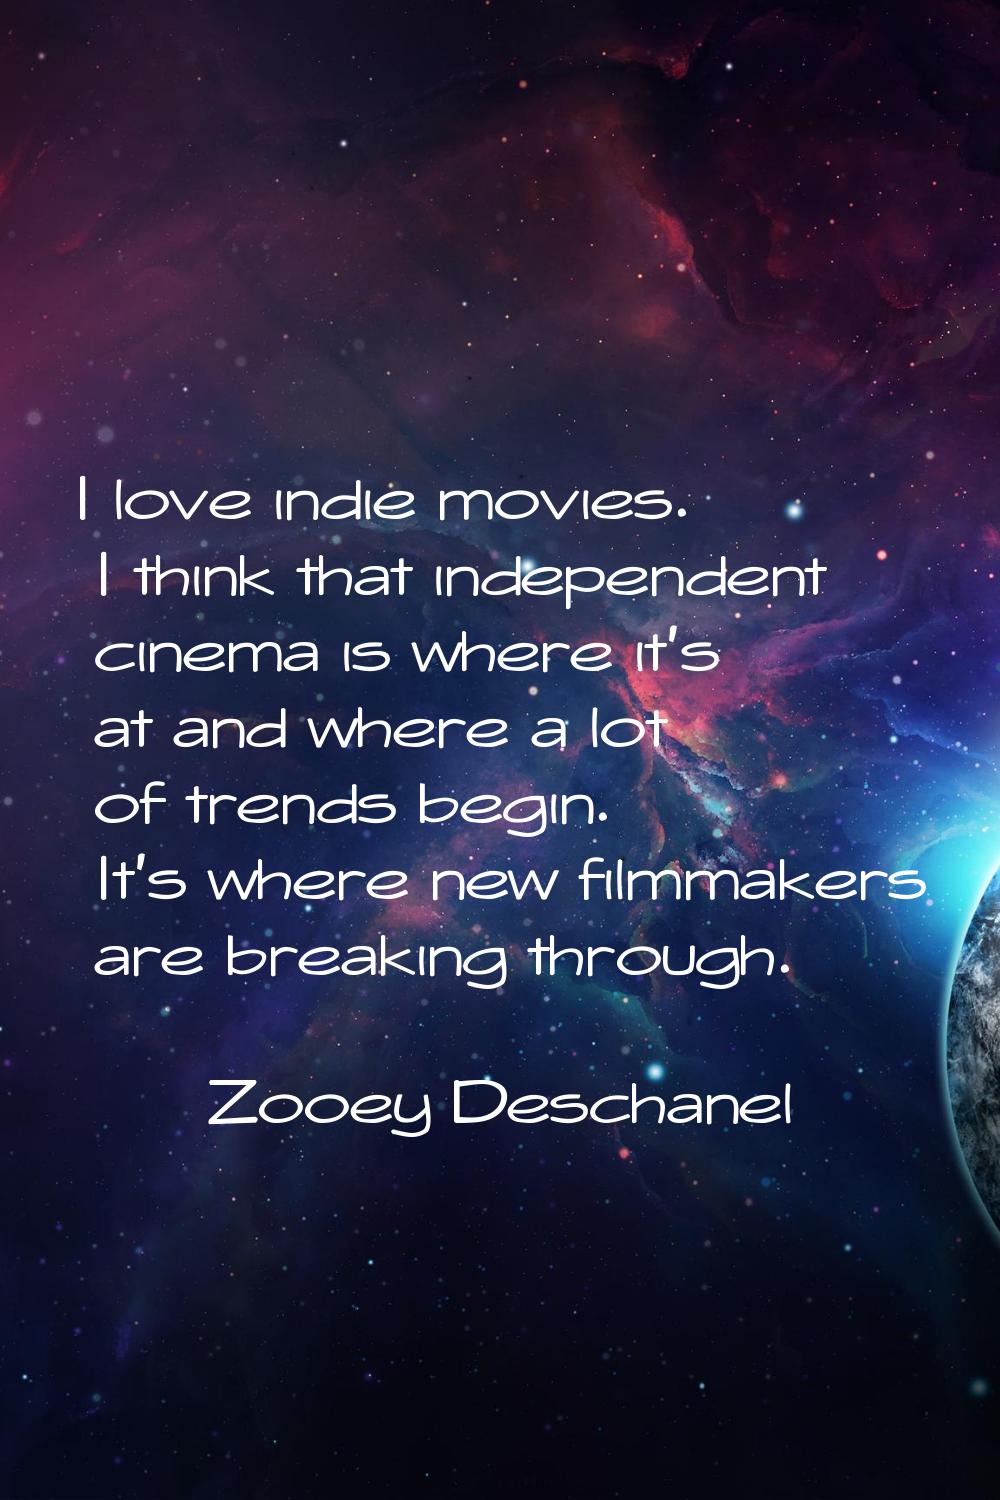 I love indie movies. I think that independent cinema is where it's at and where a lot of trends beg